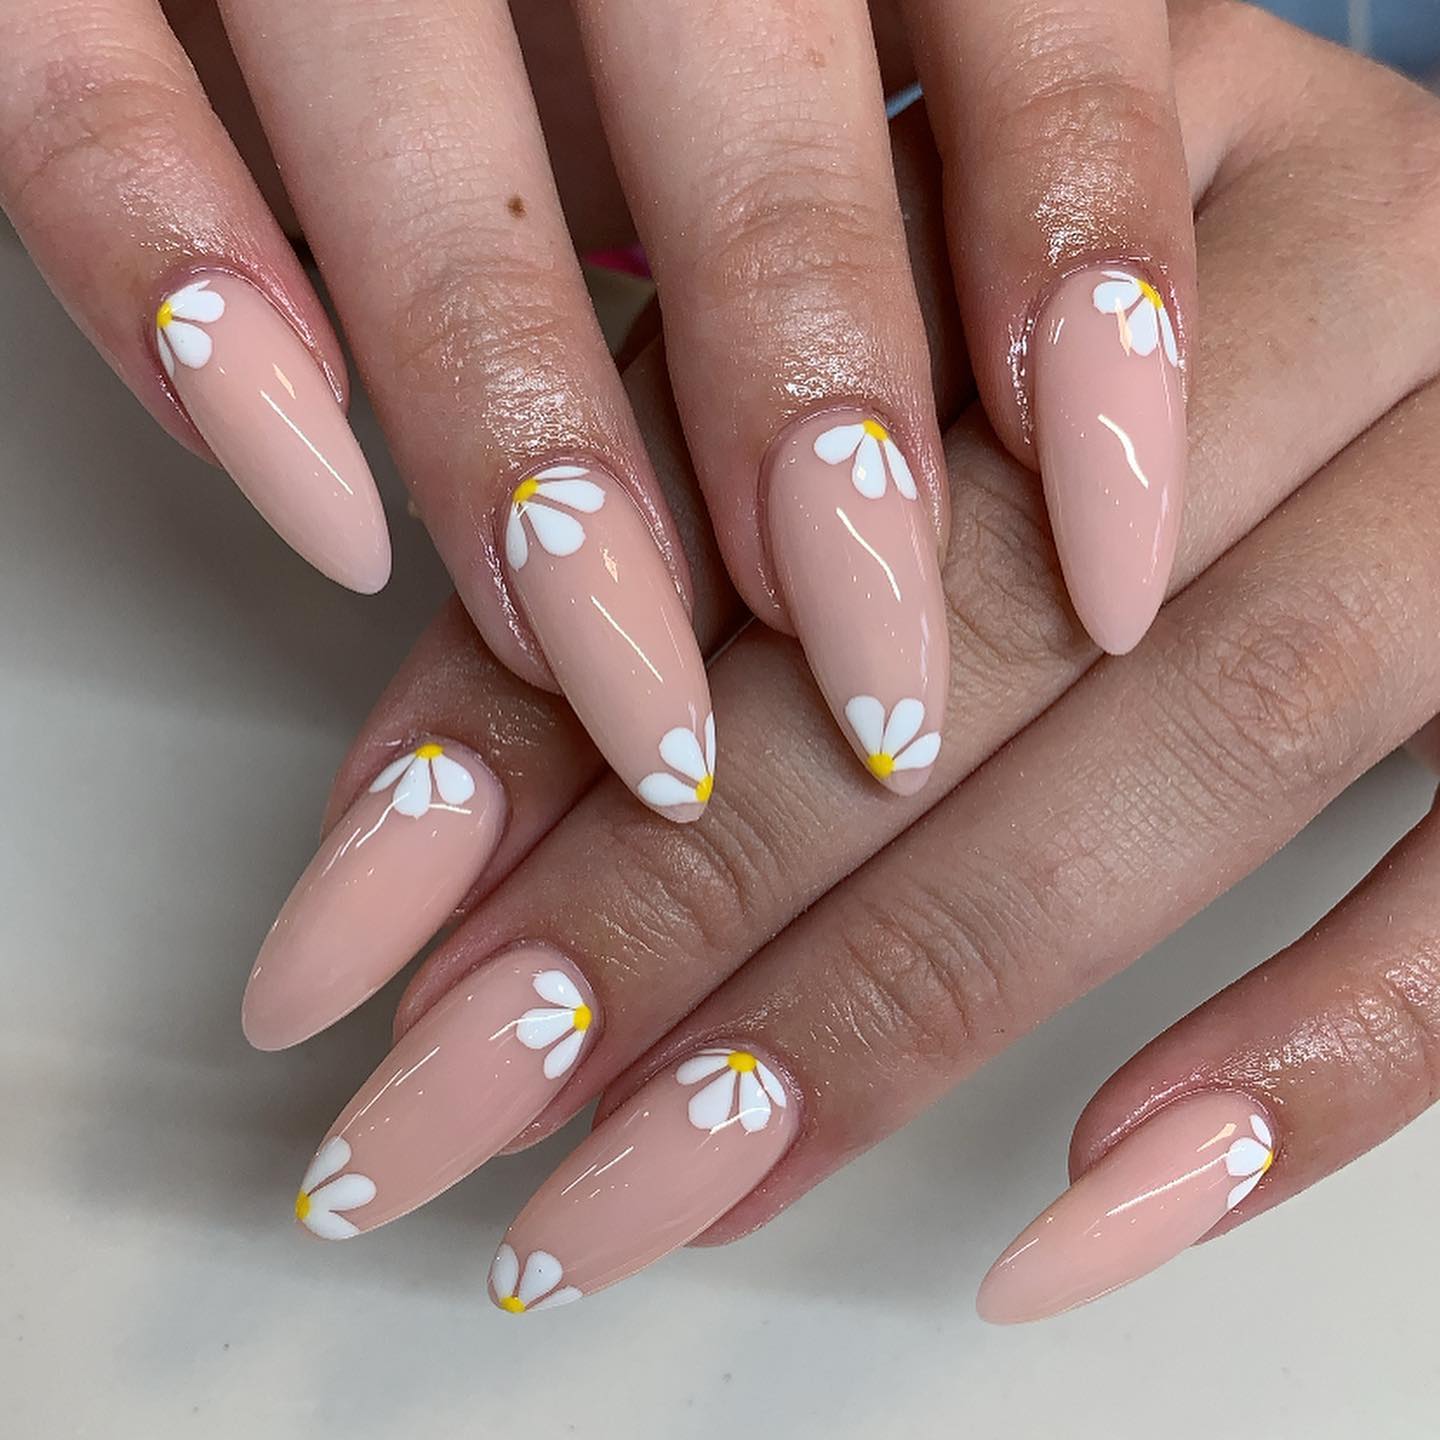 To try something new, why not having half daisy nails? White cute daisies will stand out on nude nails.